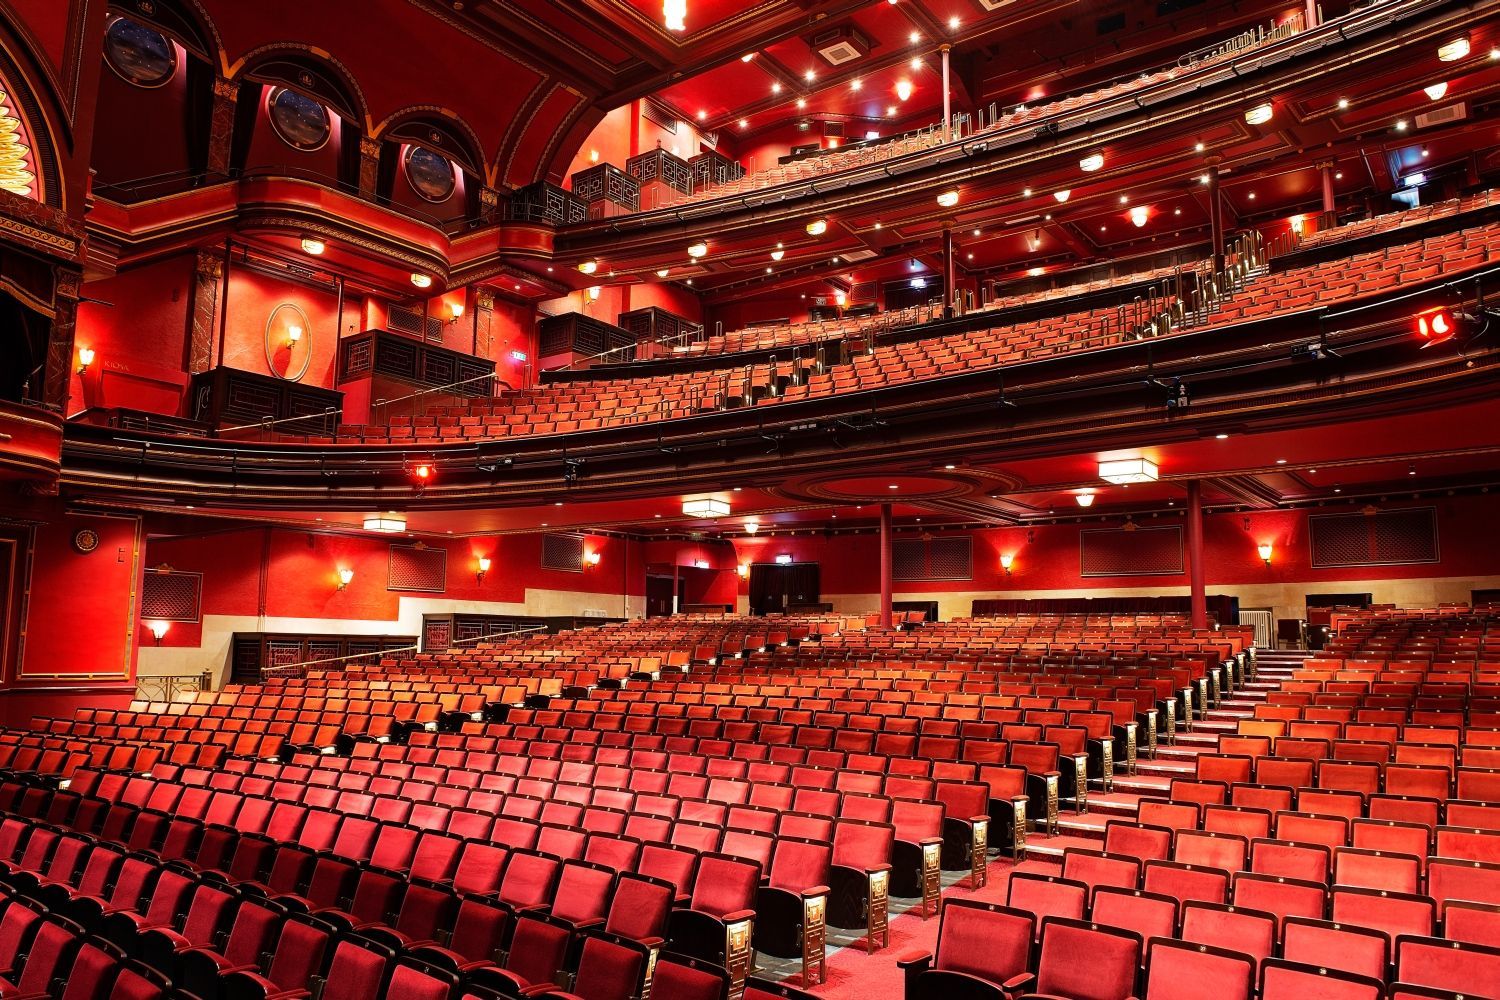 theatre-interior-with-red-seats-in-mayflower-theatre